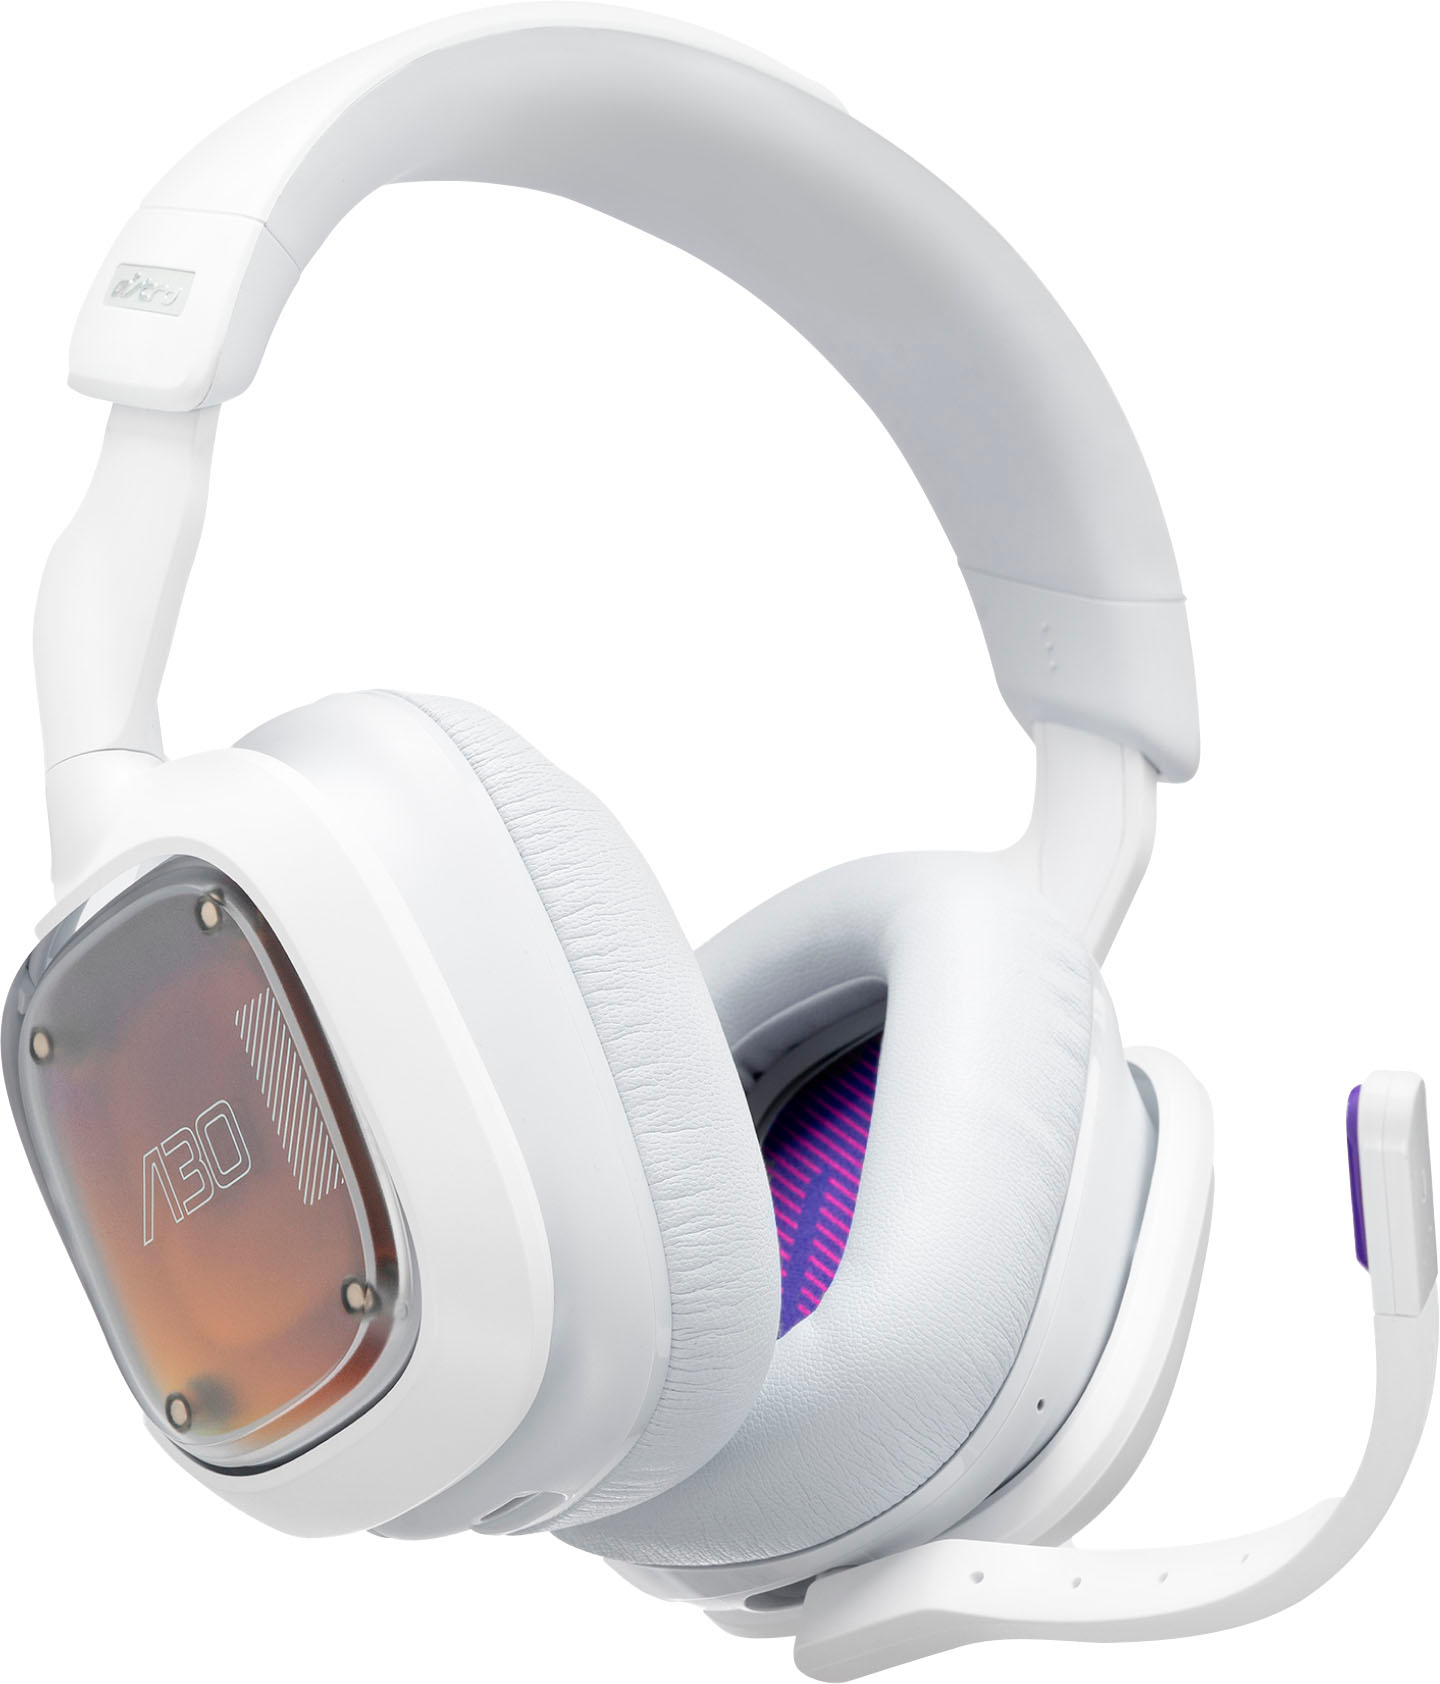 voor mij Superioriteit excelleren Astro Gaming A30 Wireless Dolby Atmos Gaming Headset for PS5, PS4, Nintendo  Switch, PC, Android with Detachable Boom Mic White 939-001992 - Best Buy